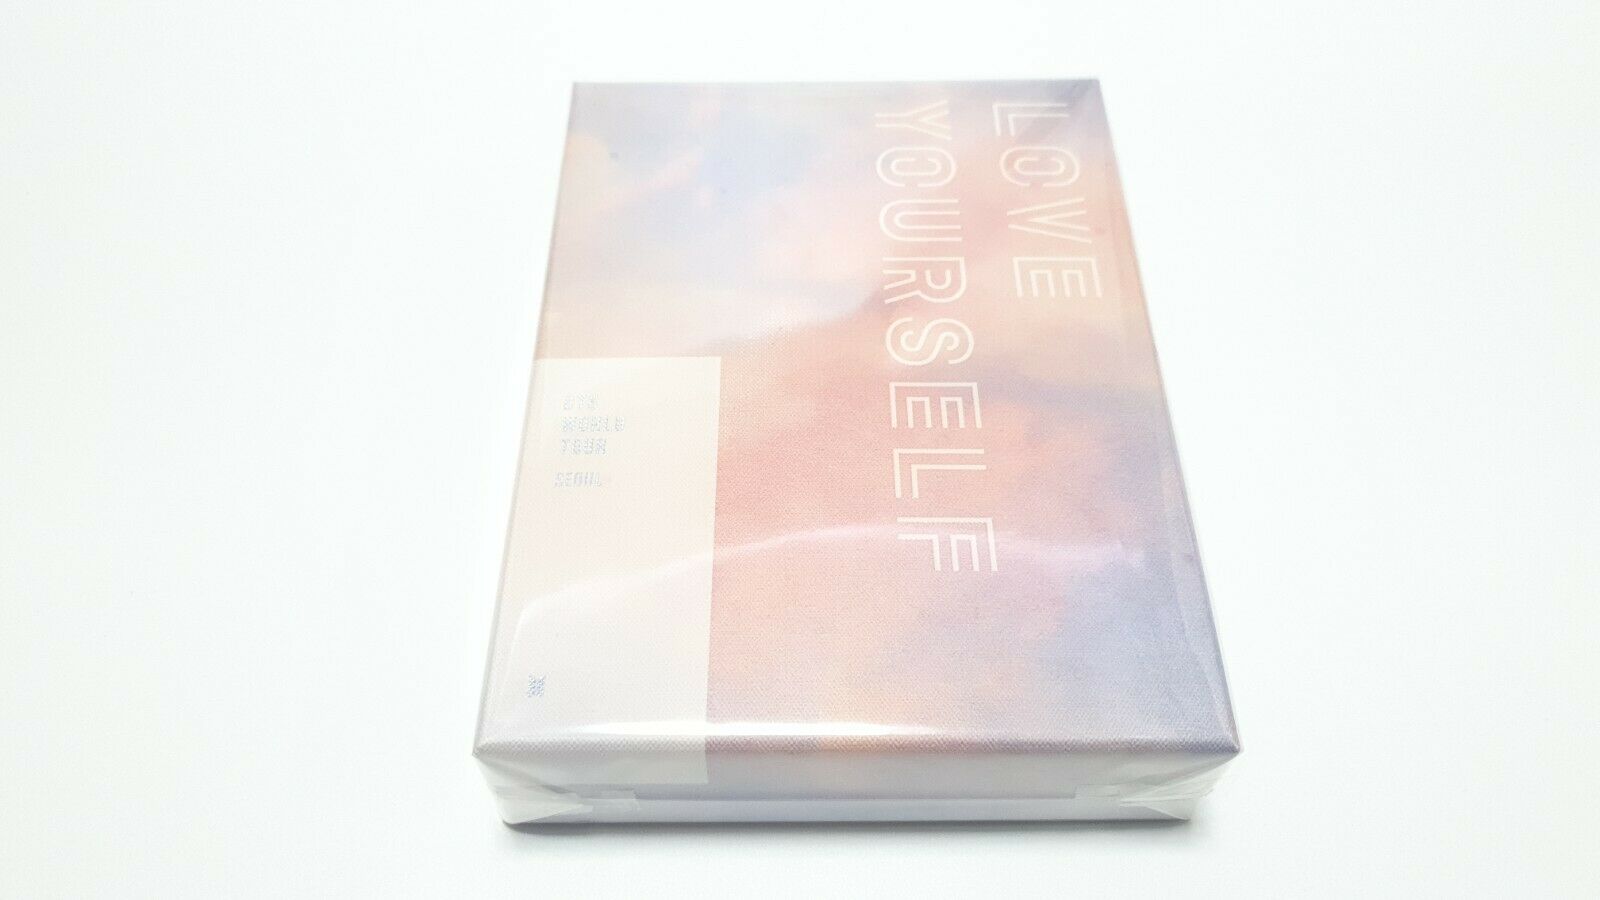 BTS Love Your Self Tour Seoul DVD PHOTOBOOK + 3DISK PACKAGE (DEFECTIVE)